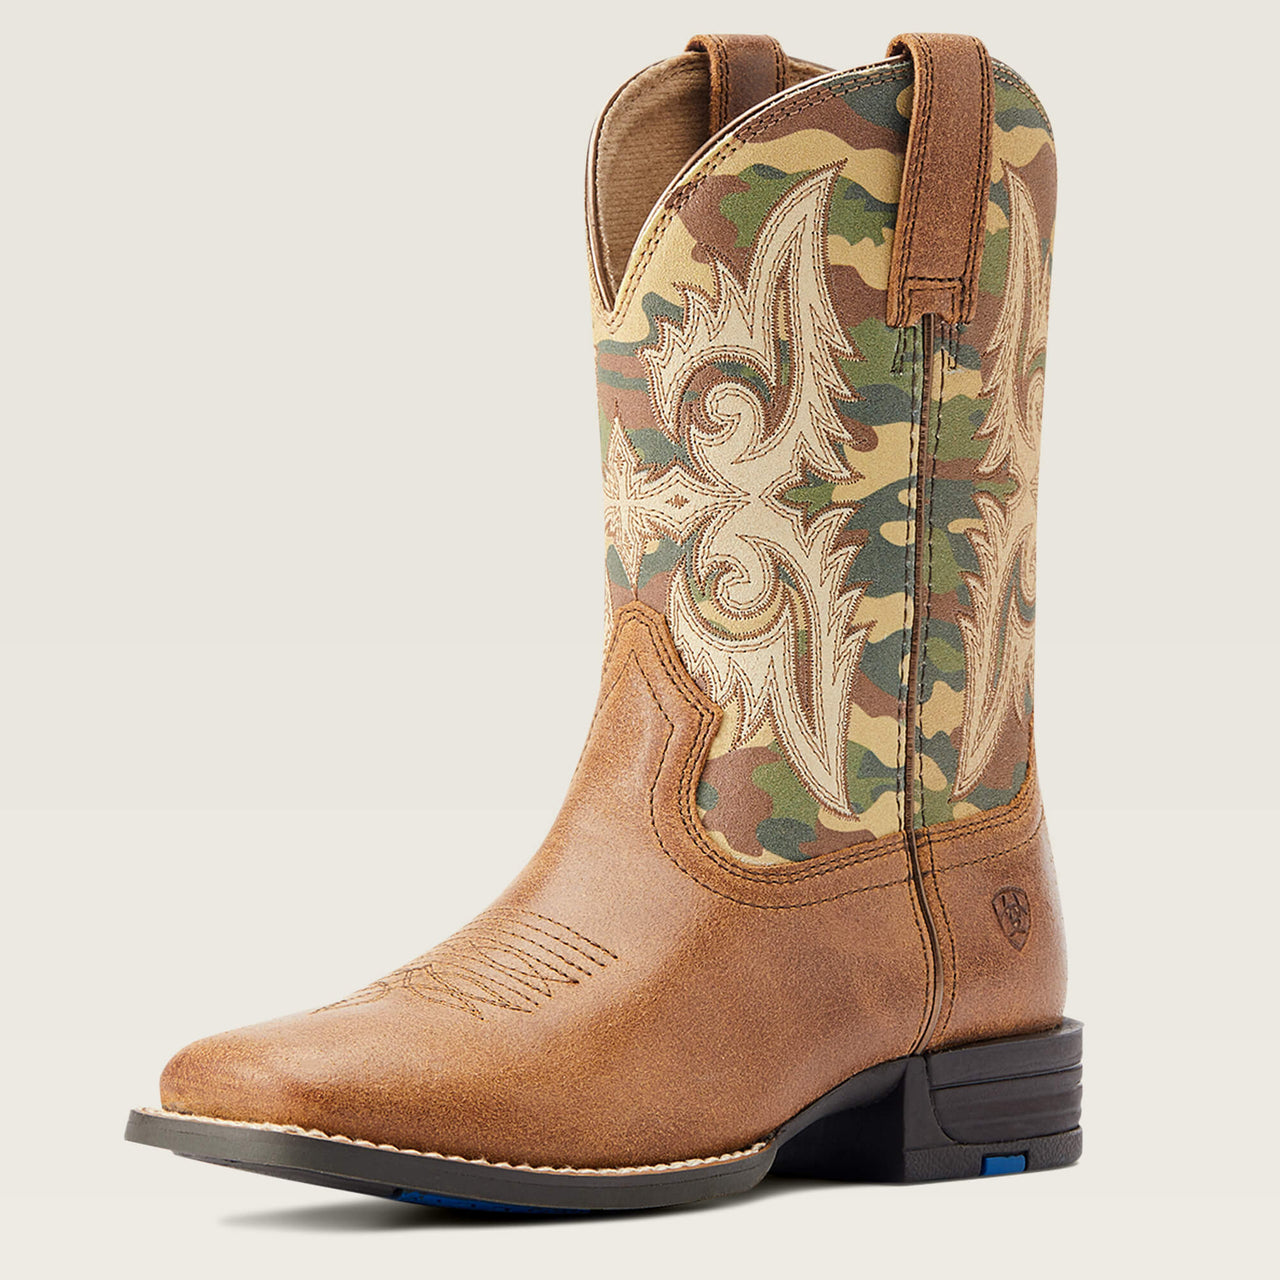 **Ariat Youth Lonestar Boots - Wicker & Camo Print